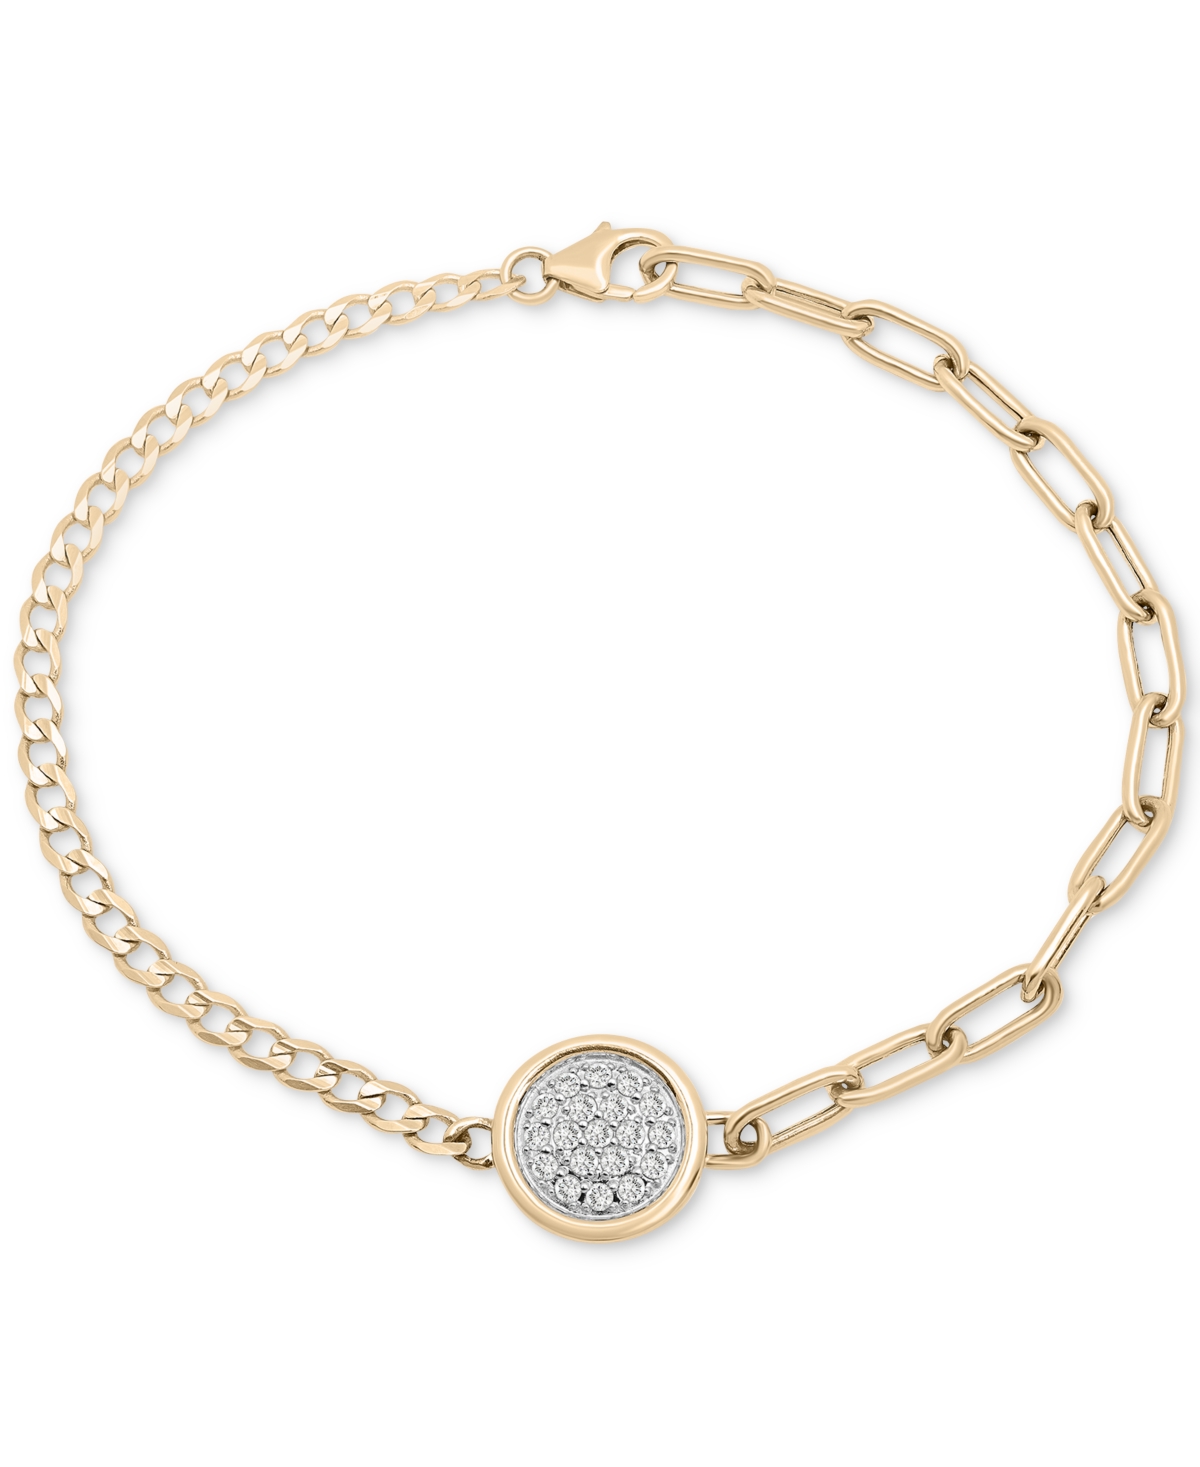 Diamond Pave Disc Two-Chain Link Bracelet (1/4 ct. t.w.) in Gold Vermeil, Created for Macy's - Gold Vermeil